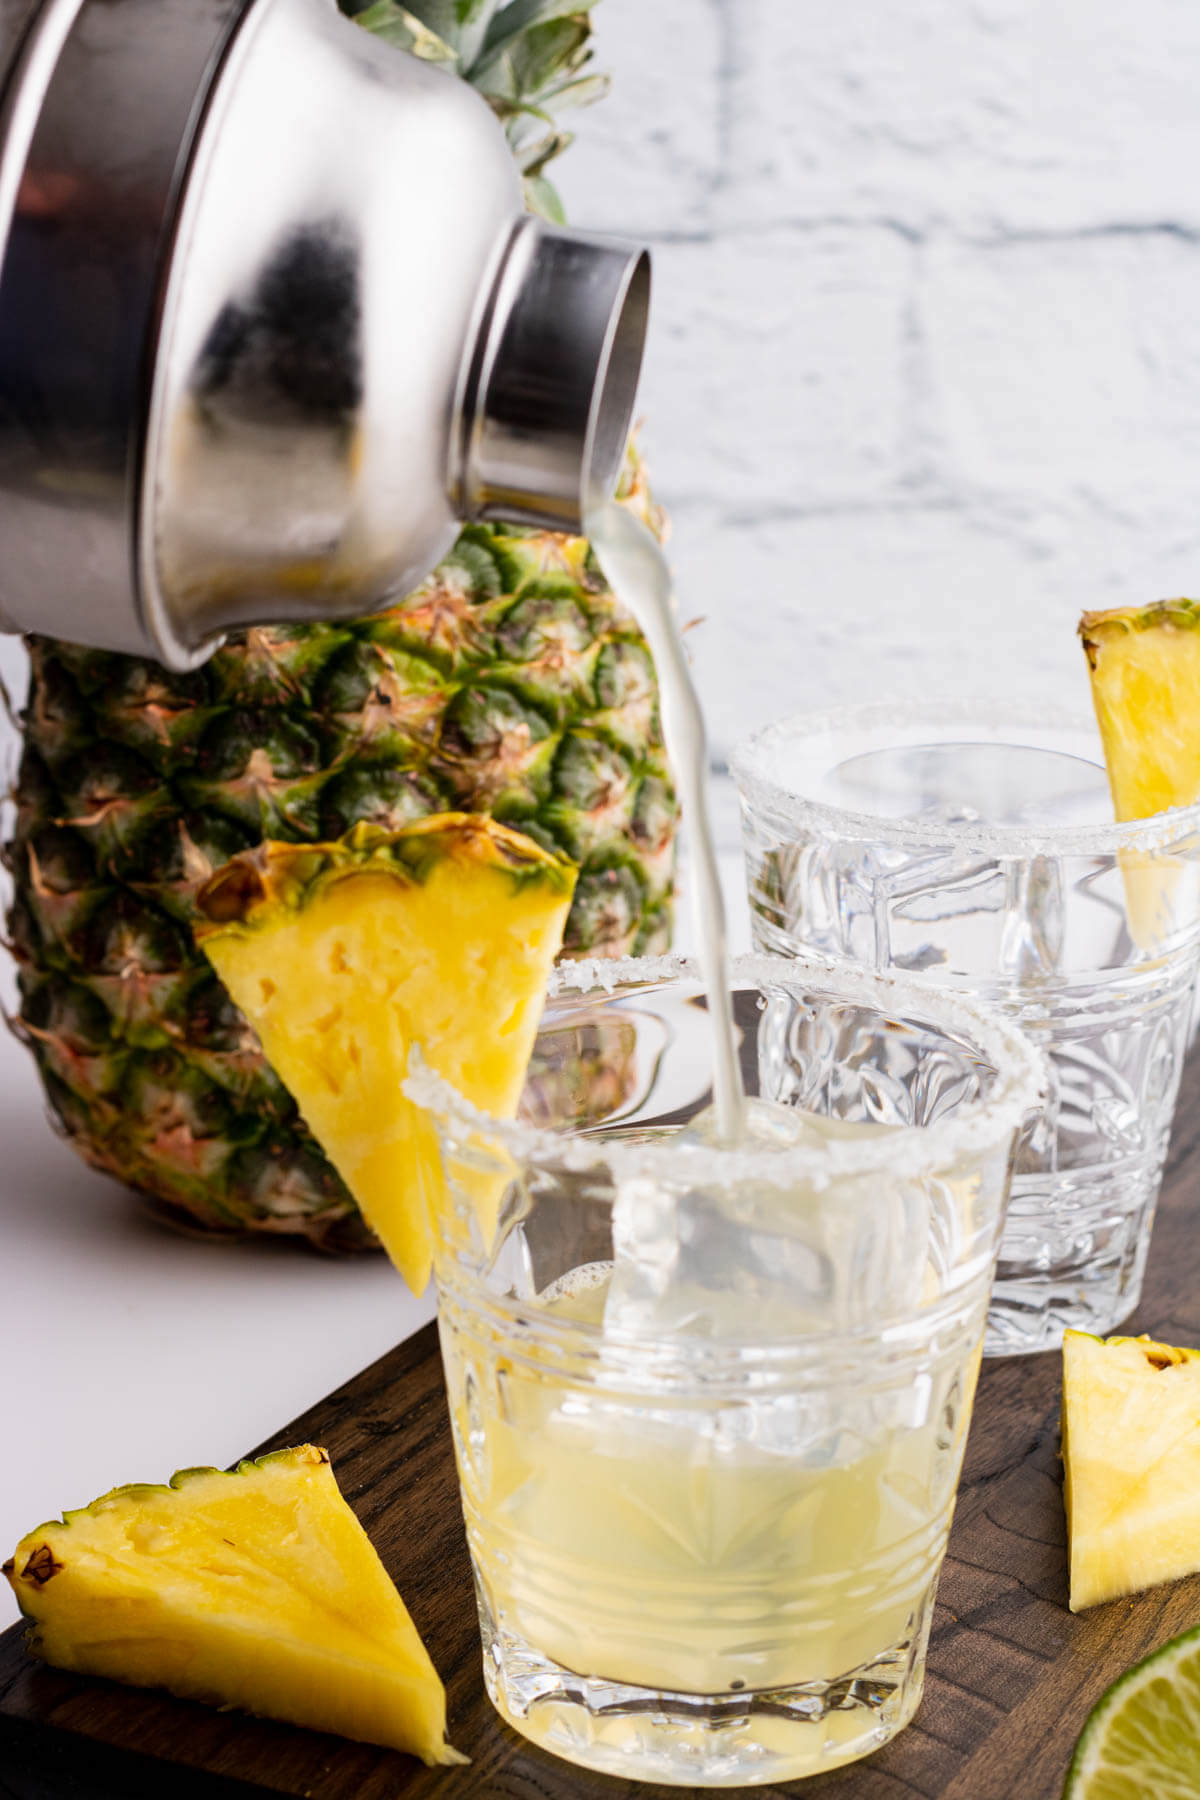 A cocktail being poured into a waiting rimmed rocks glass filled with ice and garnished with a slice of pineapple.